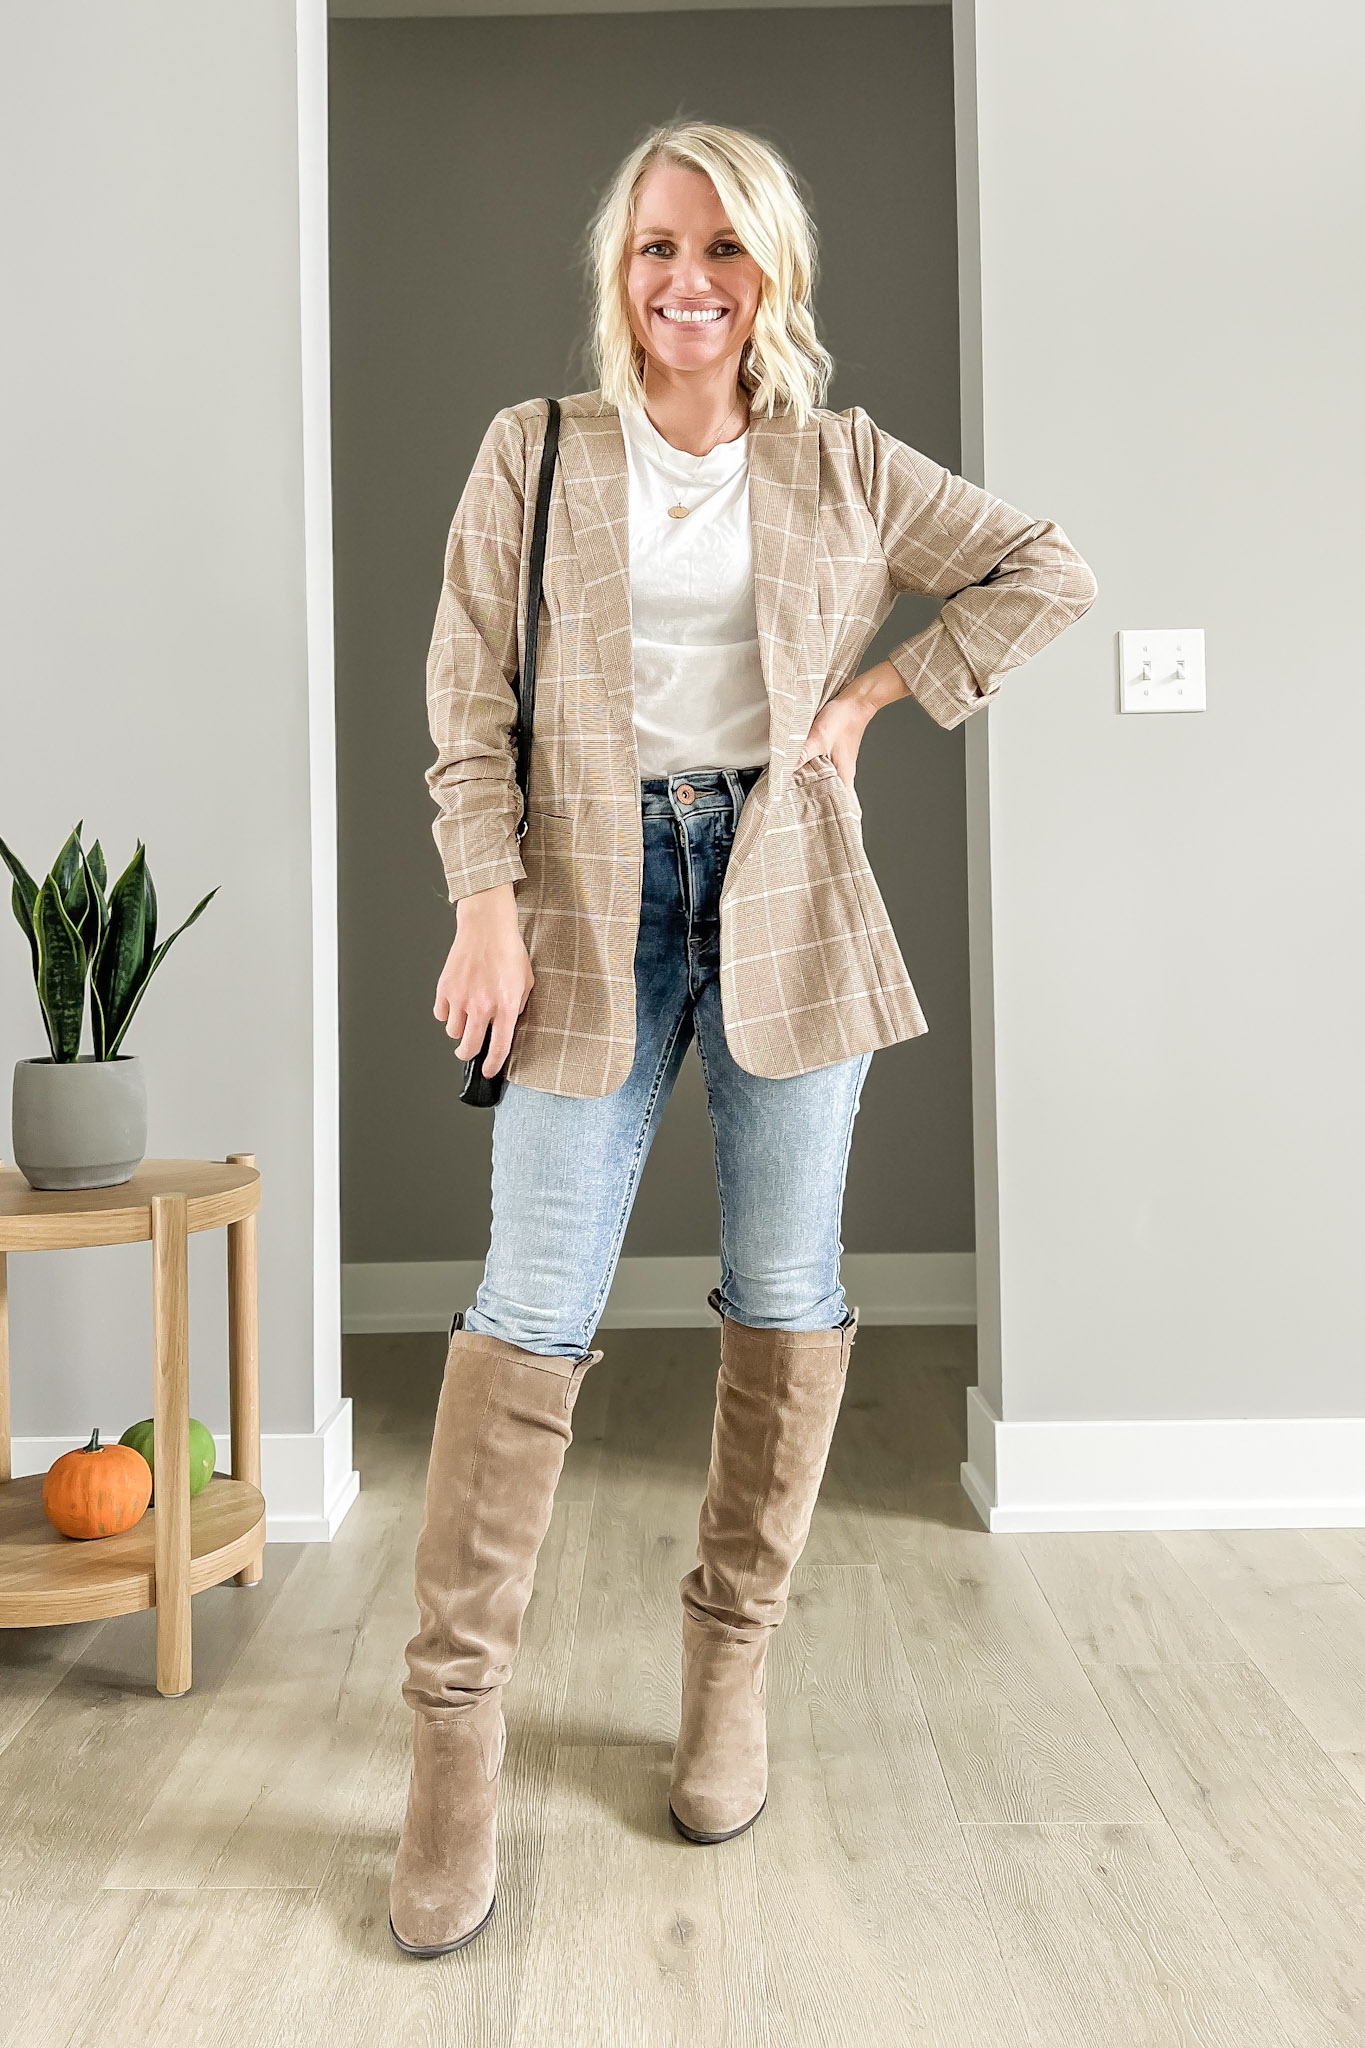 How to wear tall boots- blazer and jeans